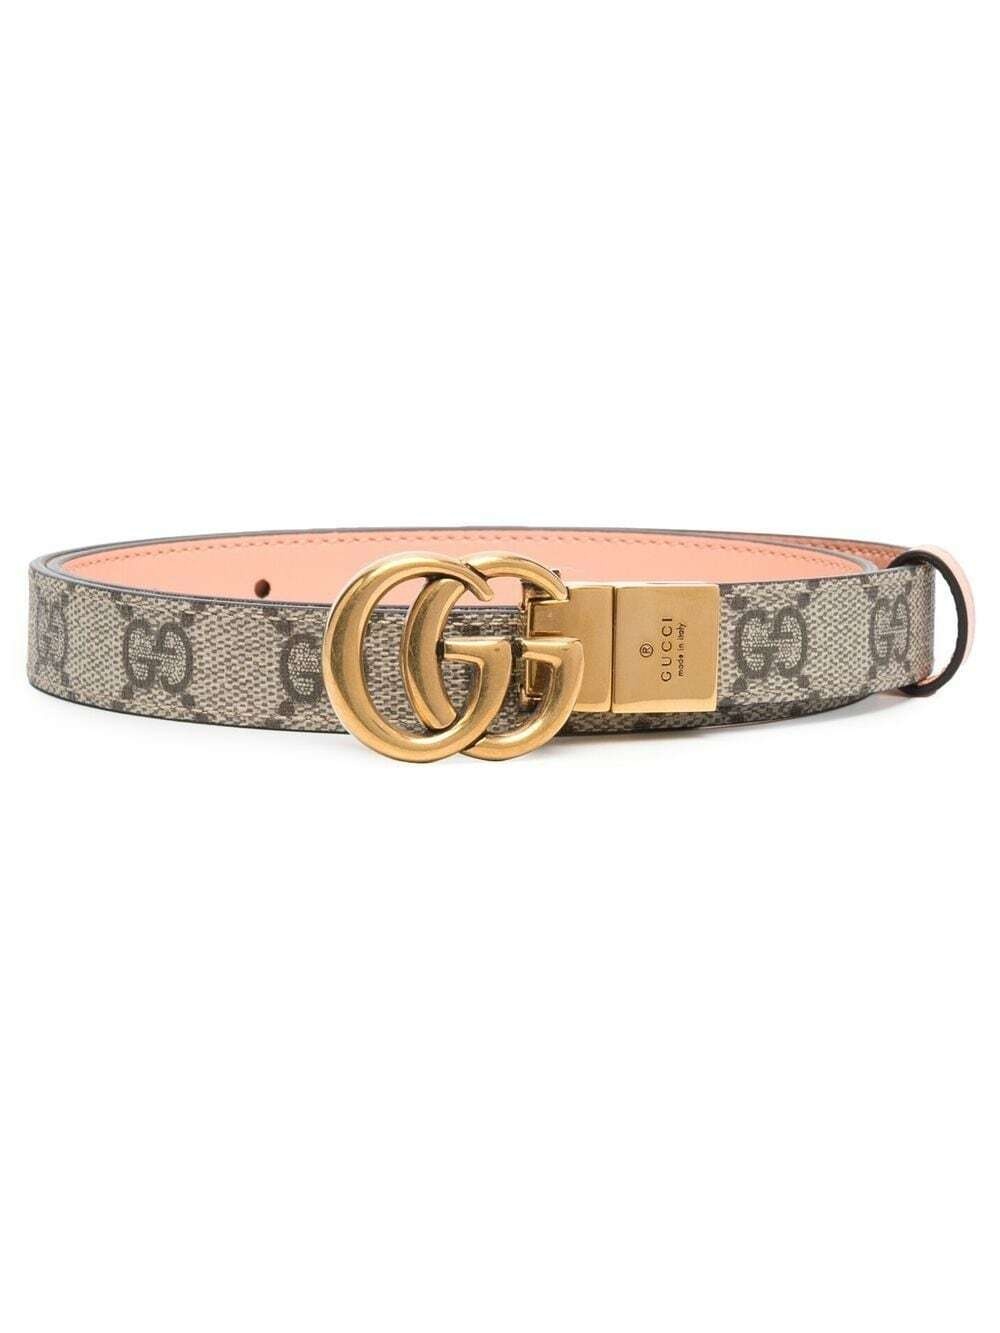 GUCCI - Gg Marmont Reversible Belt Gucci